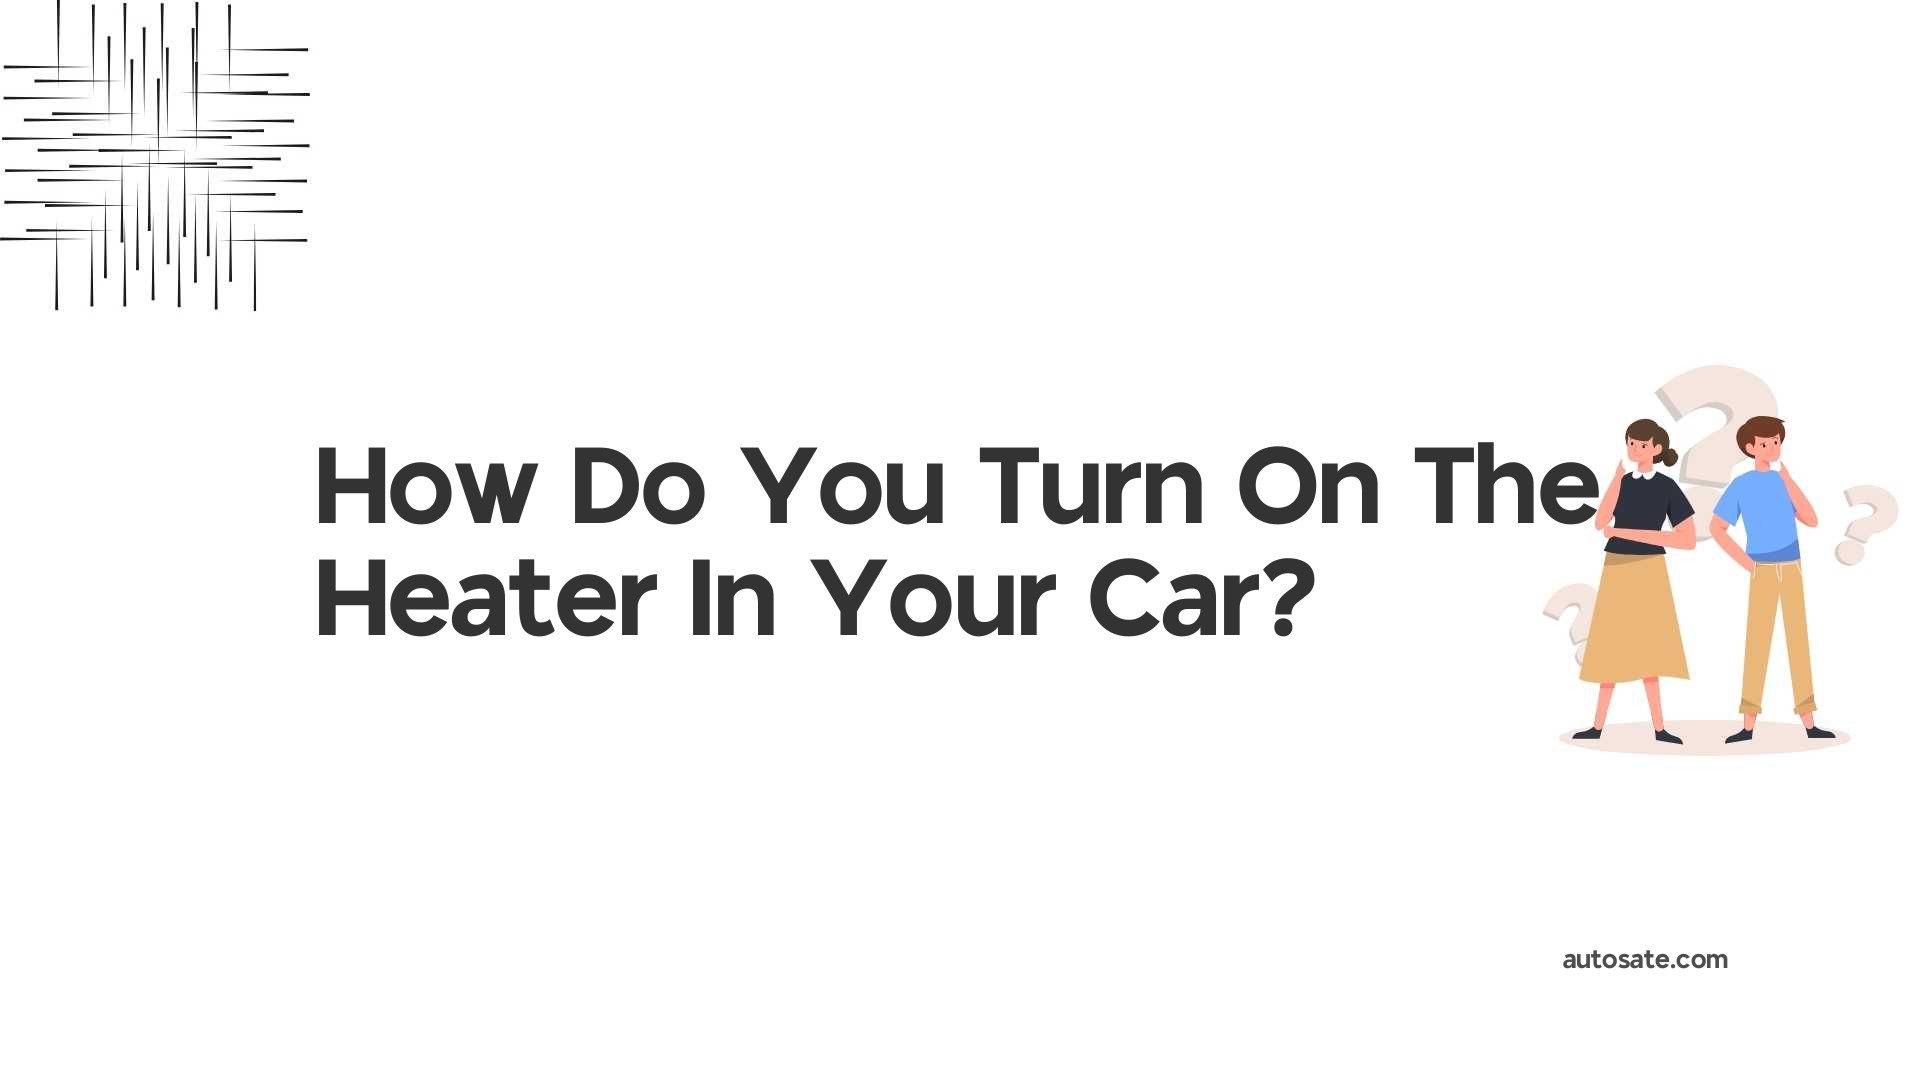 How Do You Turn On The Heater In Your Car?